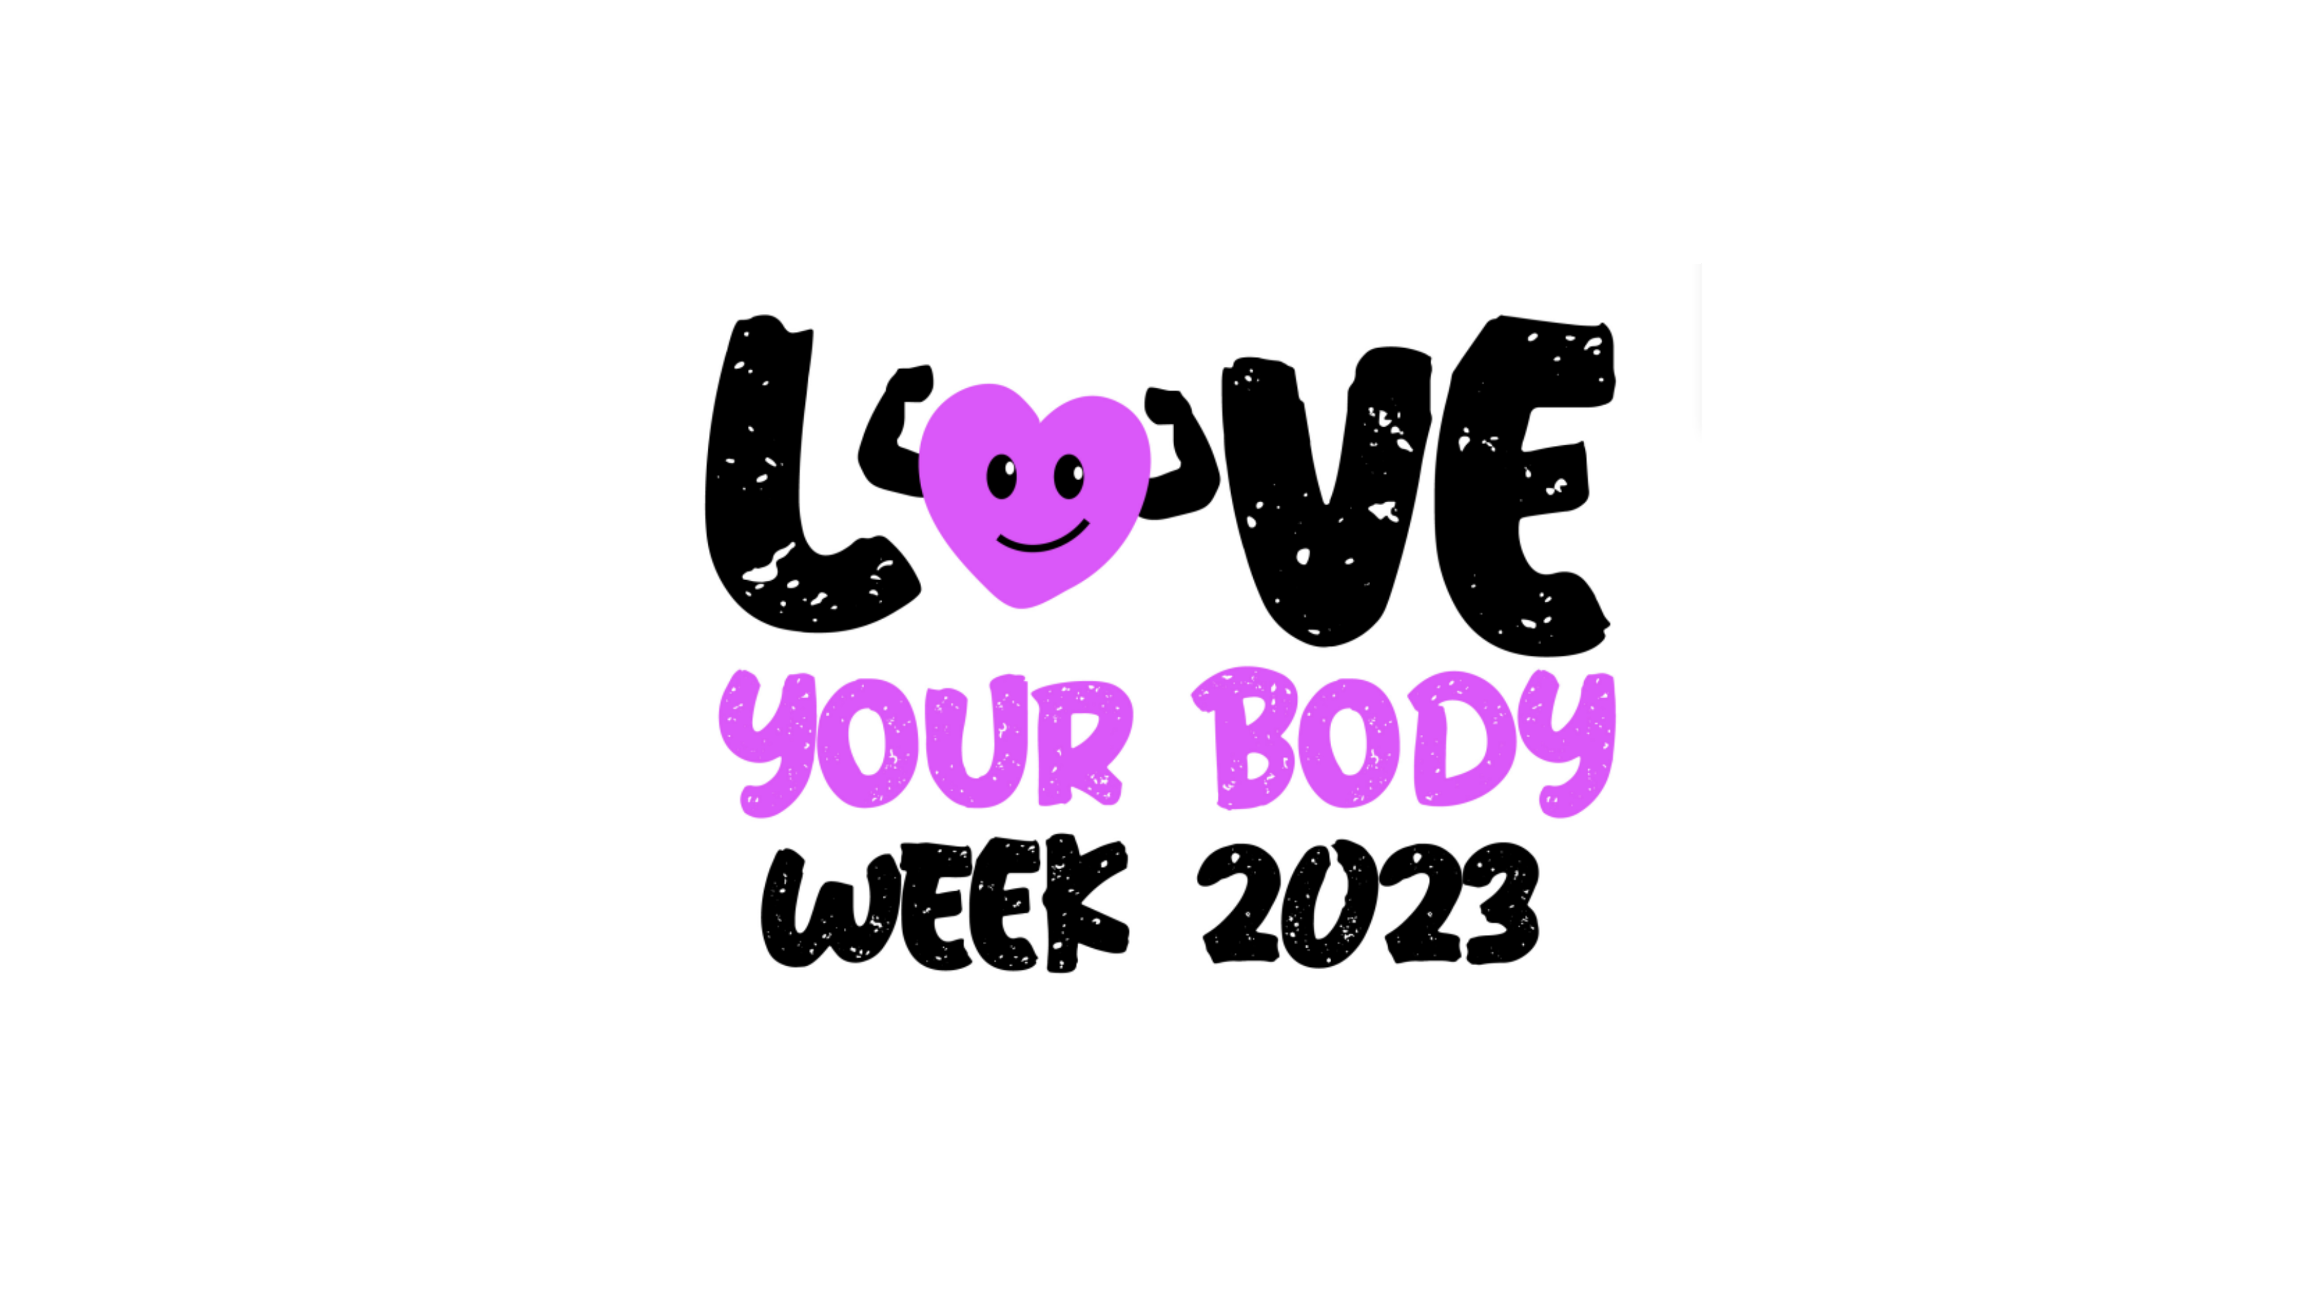 The health issues behind Love Your Body Week